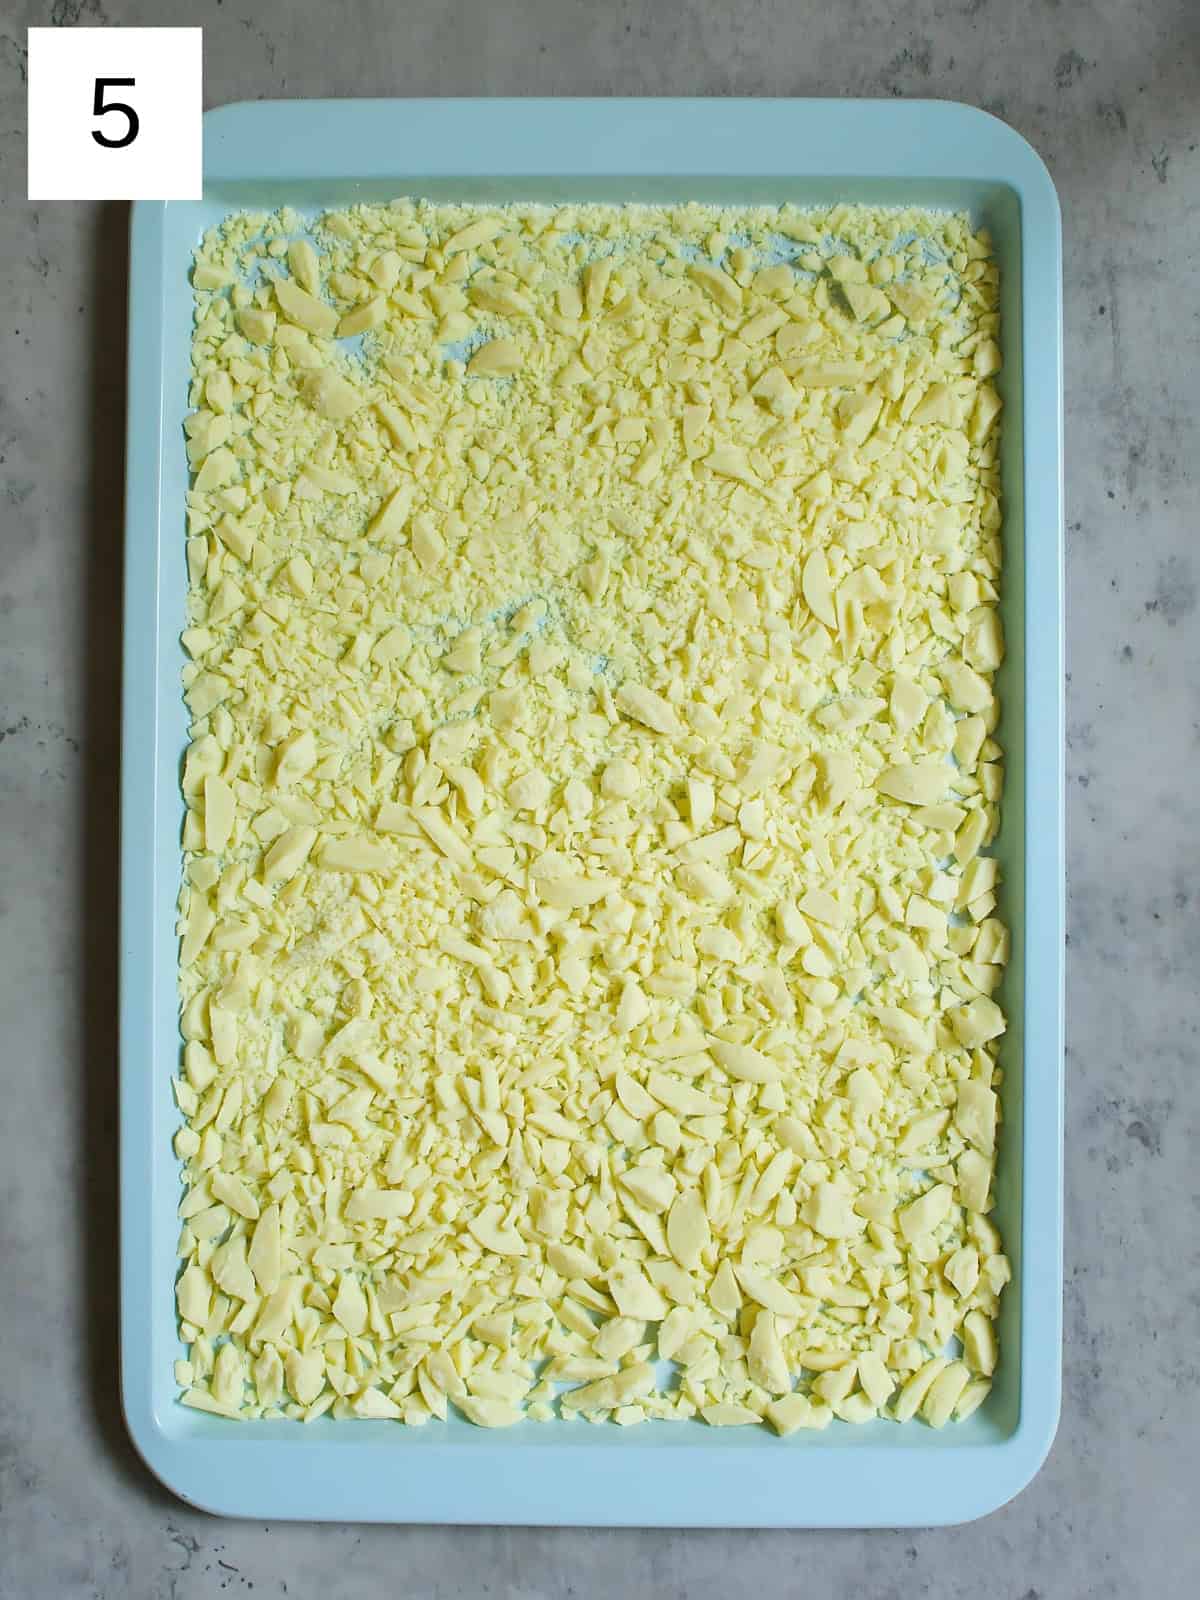 Diced white chocolates on a baking tray.